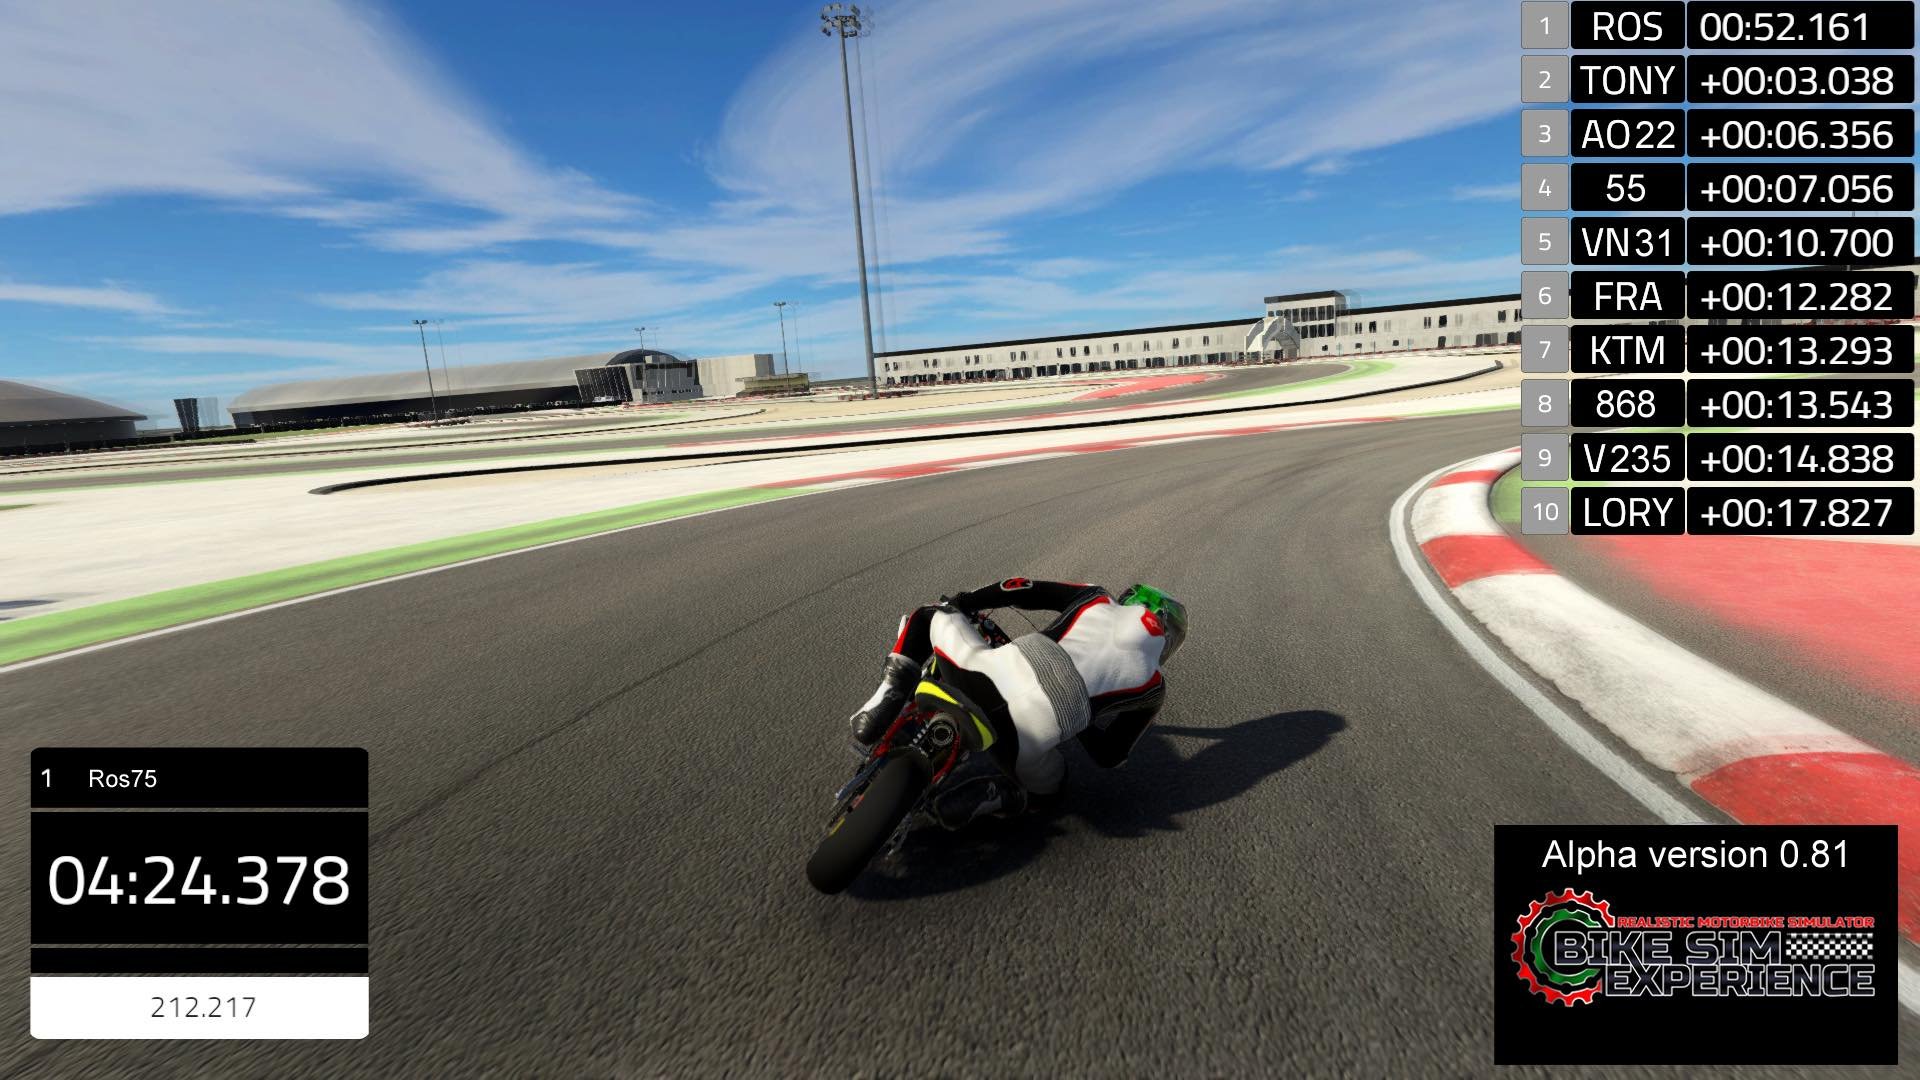 More information about "Bike Sim Experience: lo sviluppo procede a gonfie vele"